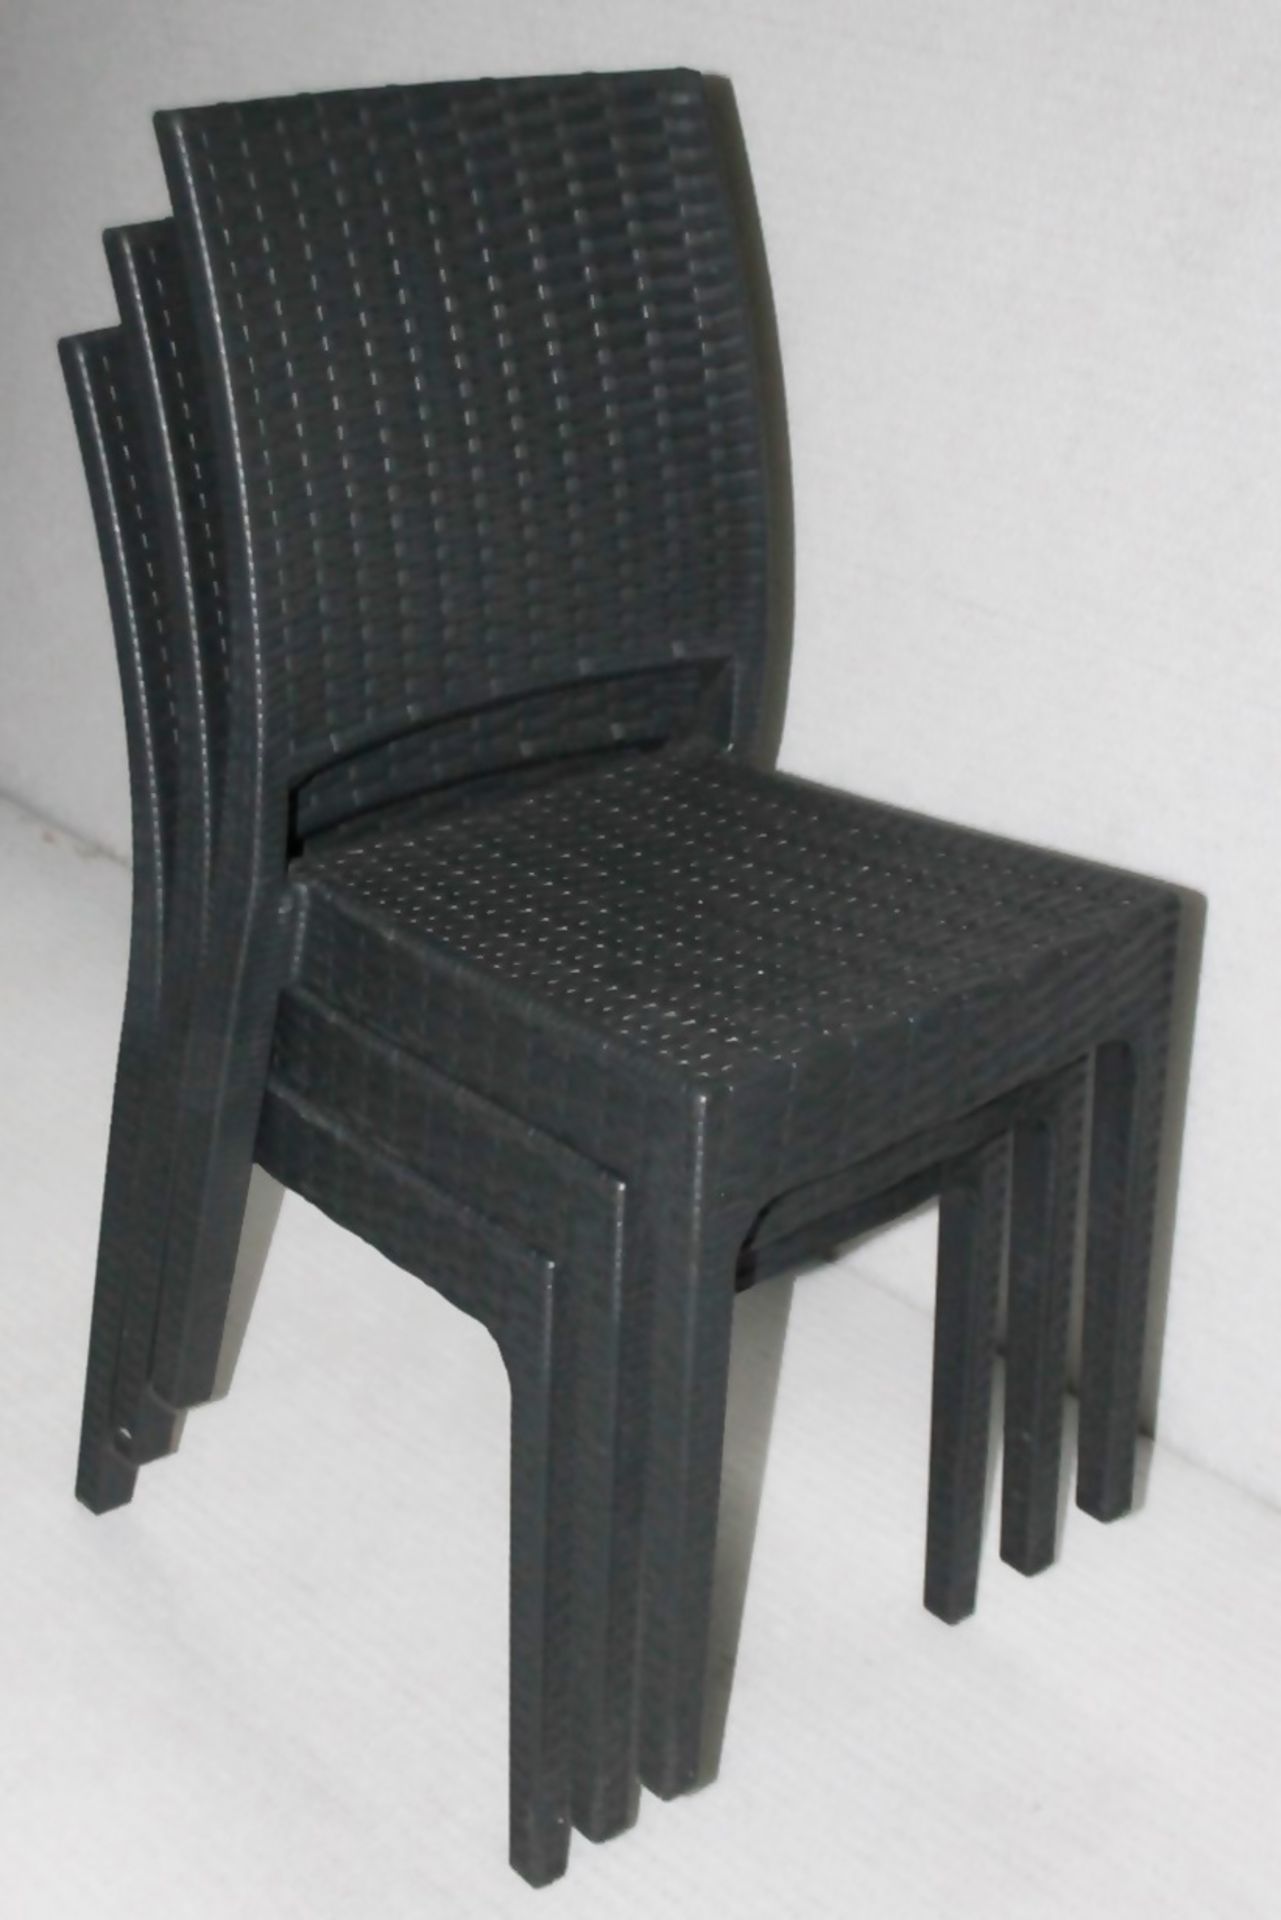 4 x SIESTA EXCLUSIVE 'Florida' Commercial Stackable Rattan-style Chairs In Dark Grey - RRP £320.00 - Image 7 of 13